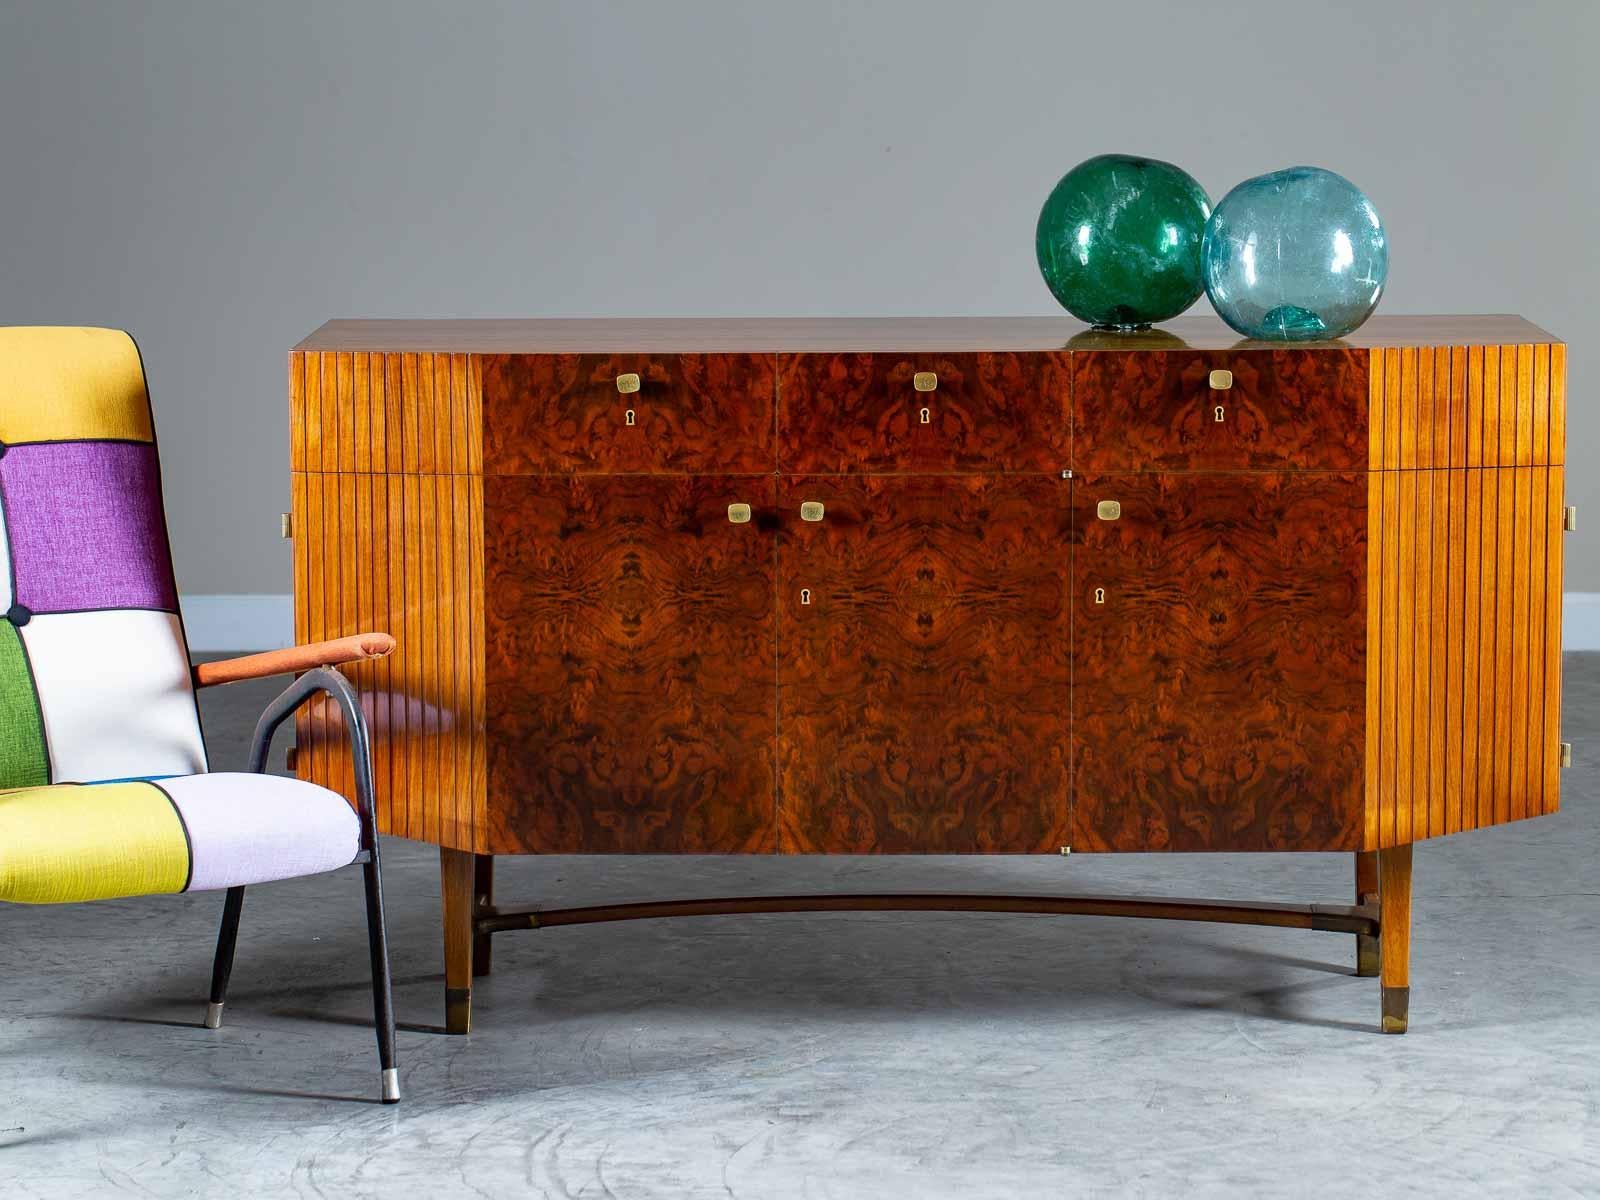 A striking Mid-Century Modern Italian burl walnut buffet credenza circa 1950 featuring the original brass hardware. This unique Italian cabinet has a surprising façade with a straight front flanked by front sides that slant toward the back. Designed